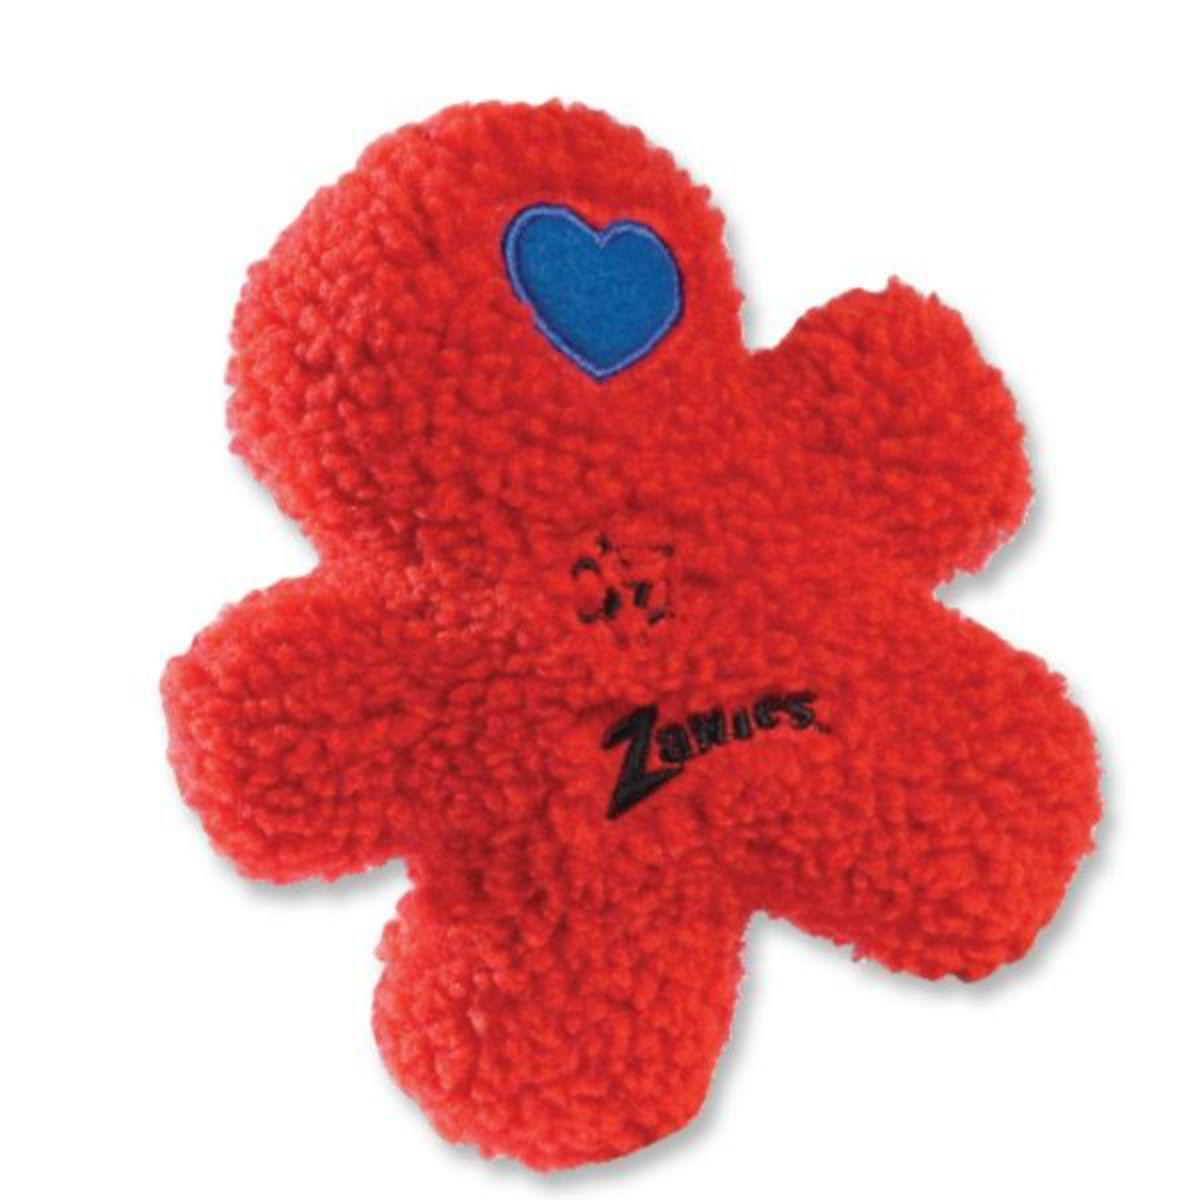 Zanies Embroidered Berber Boys Dog Toy - Red